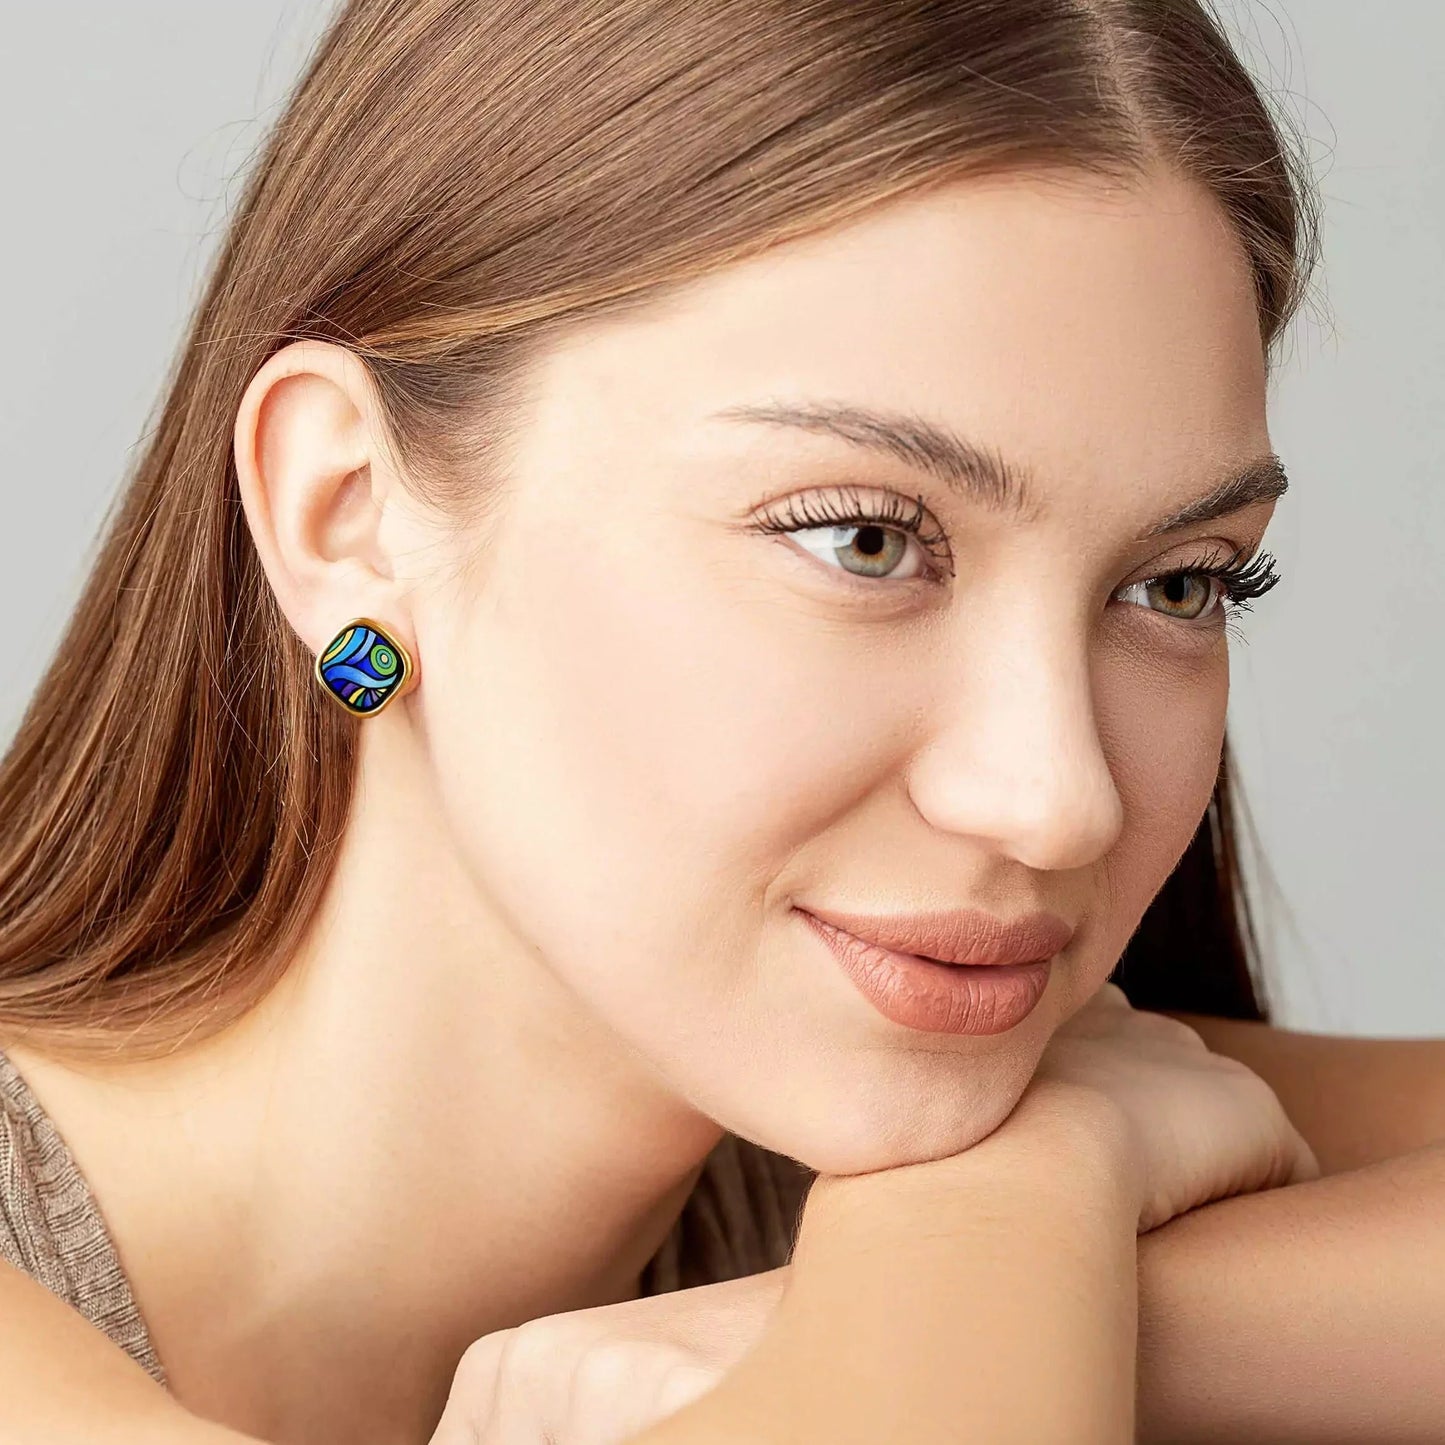 Earrings from the Starry Night collection on a girl